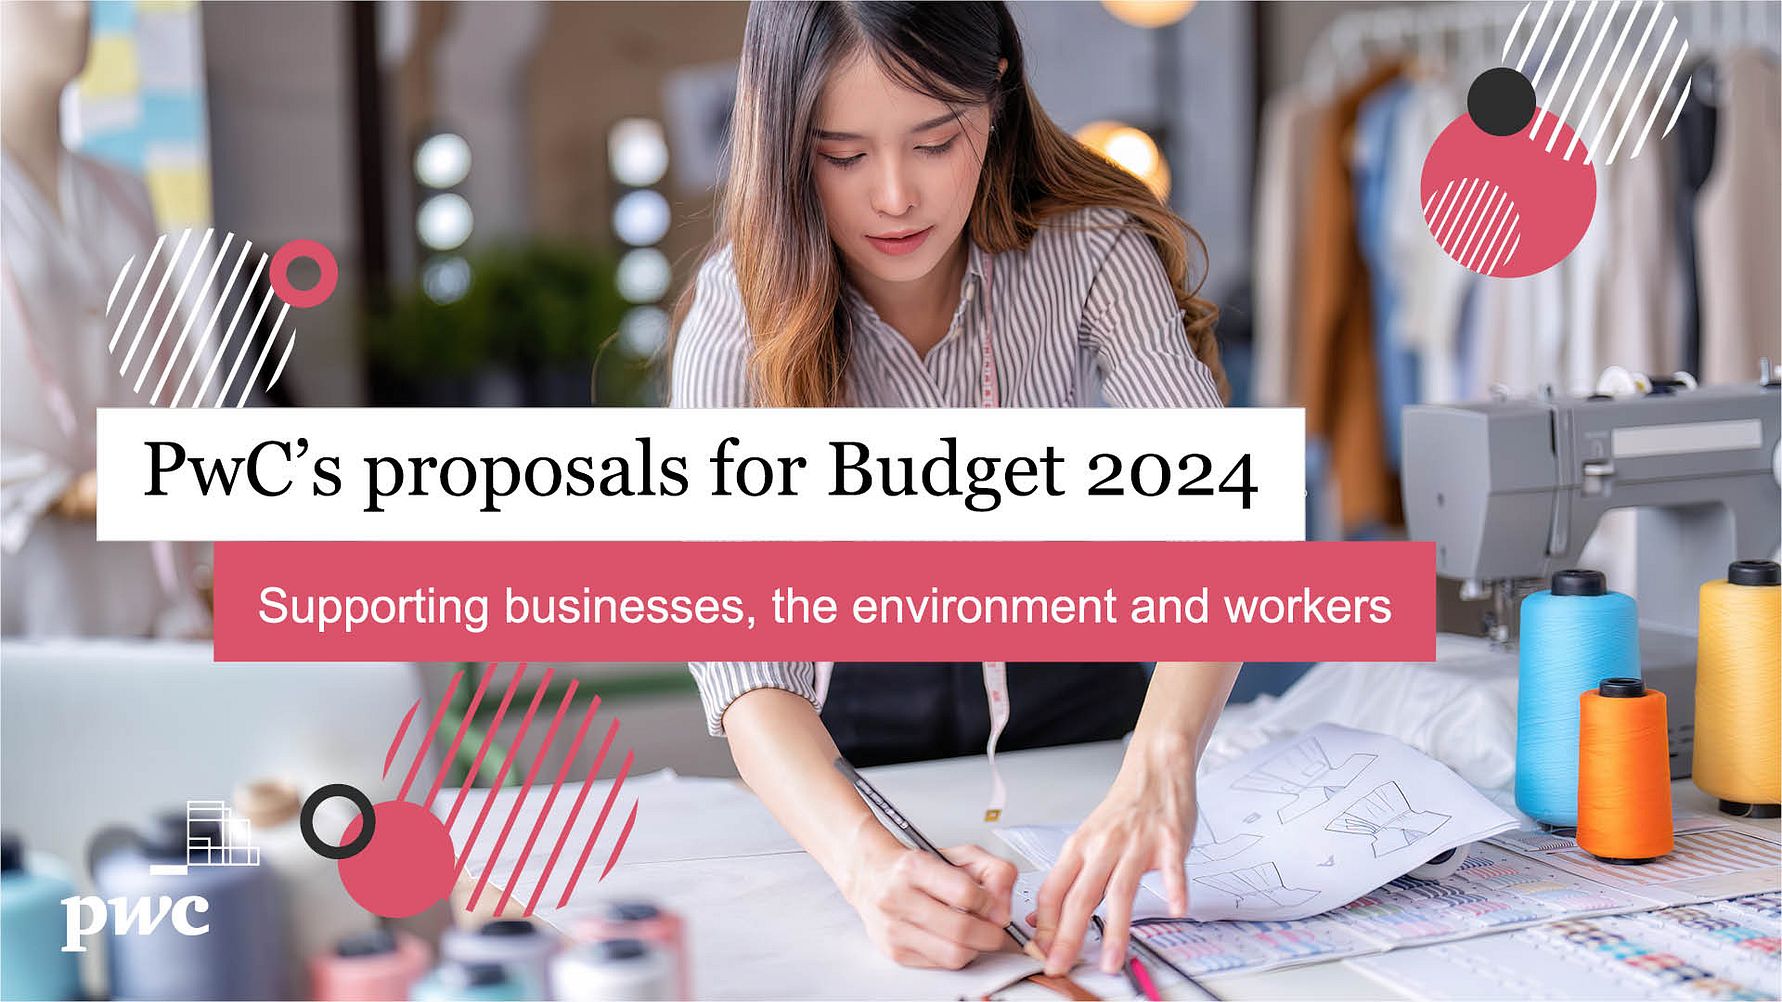 PwC Singapore's Budget 2024 proposals call for support to uplift businesses, operationalise sustainability and extend care to employees